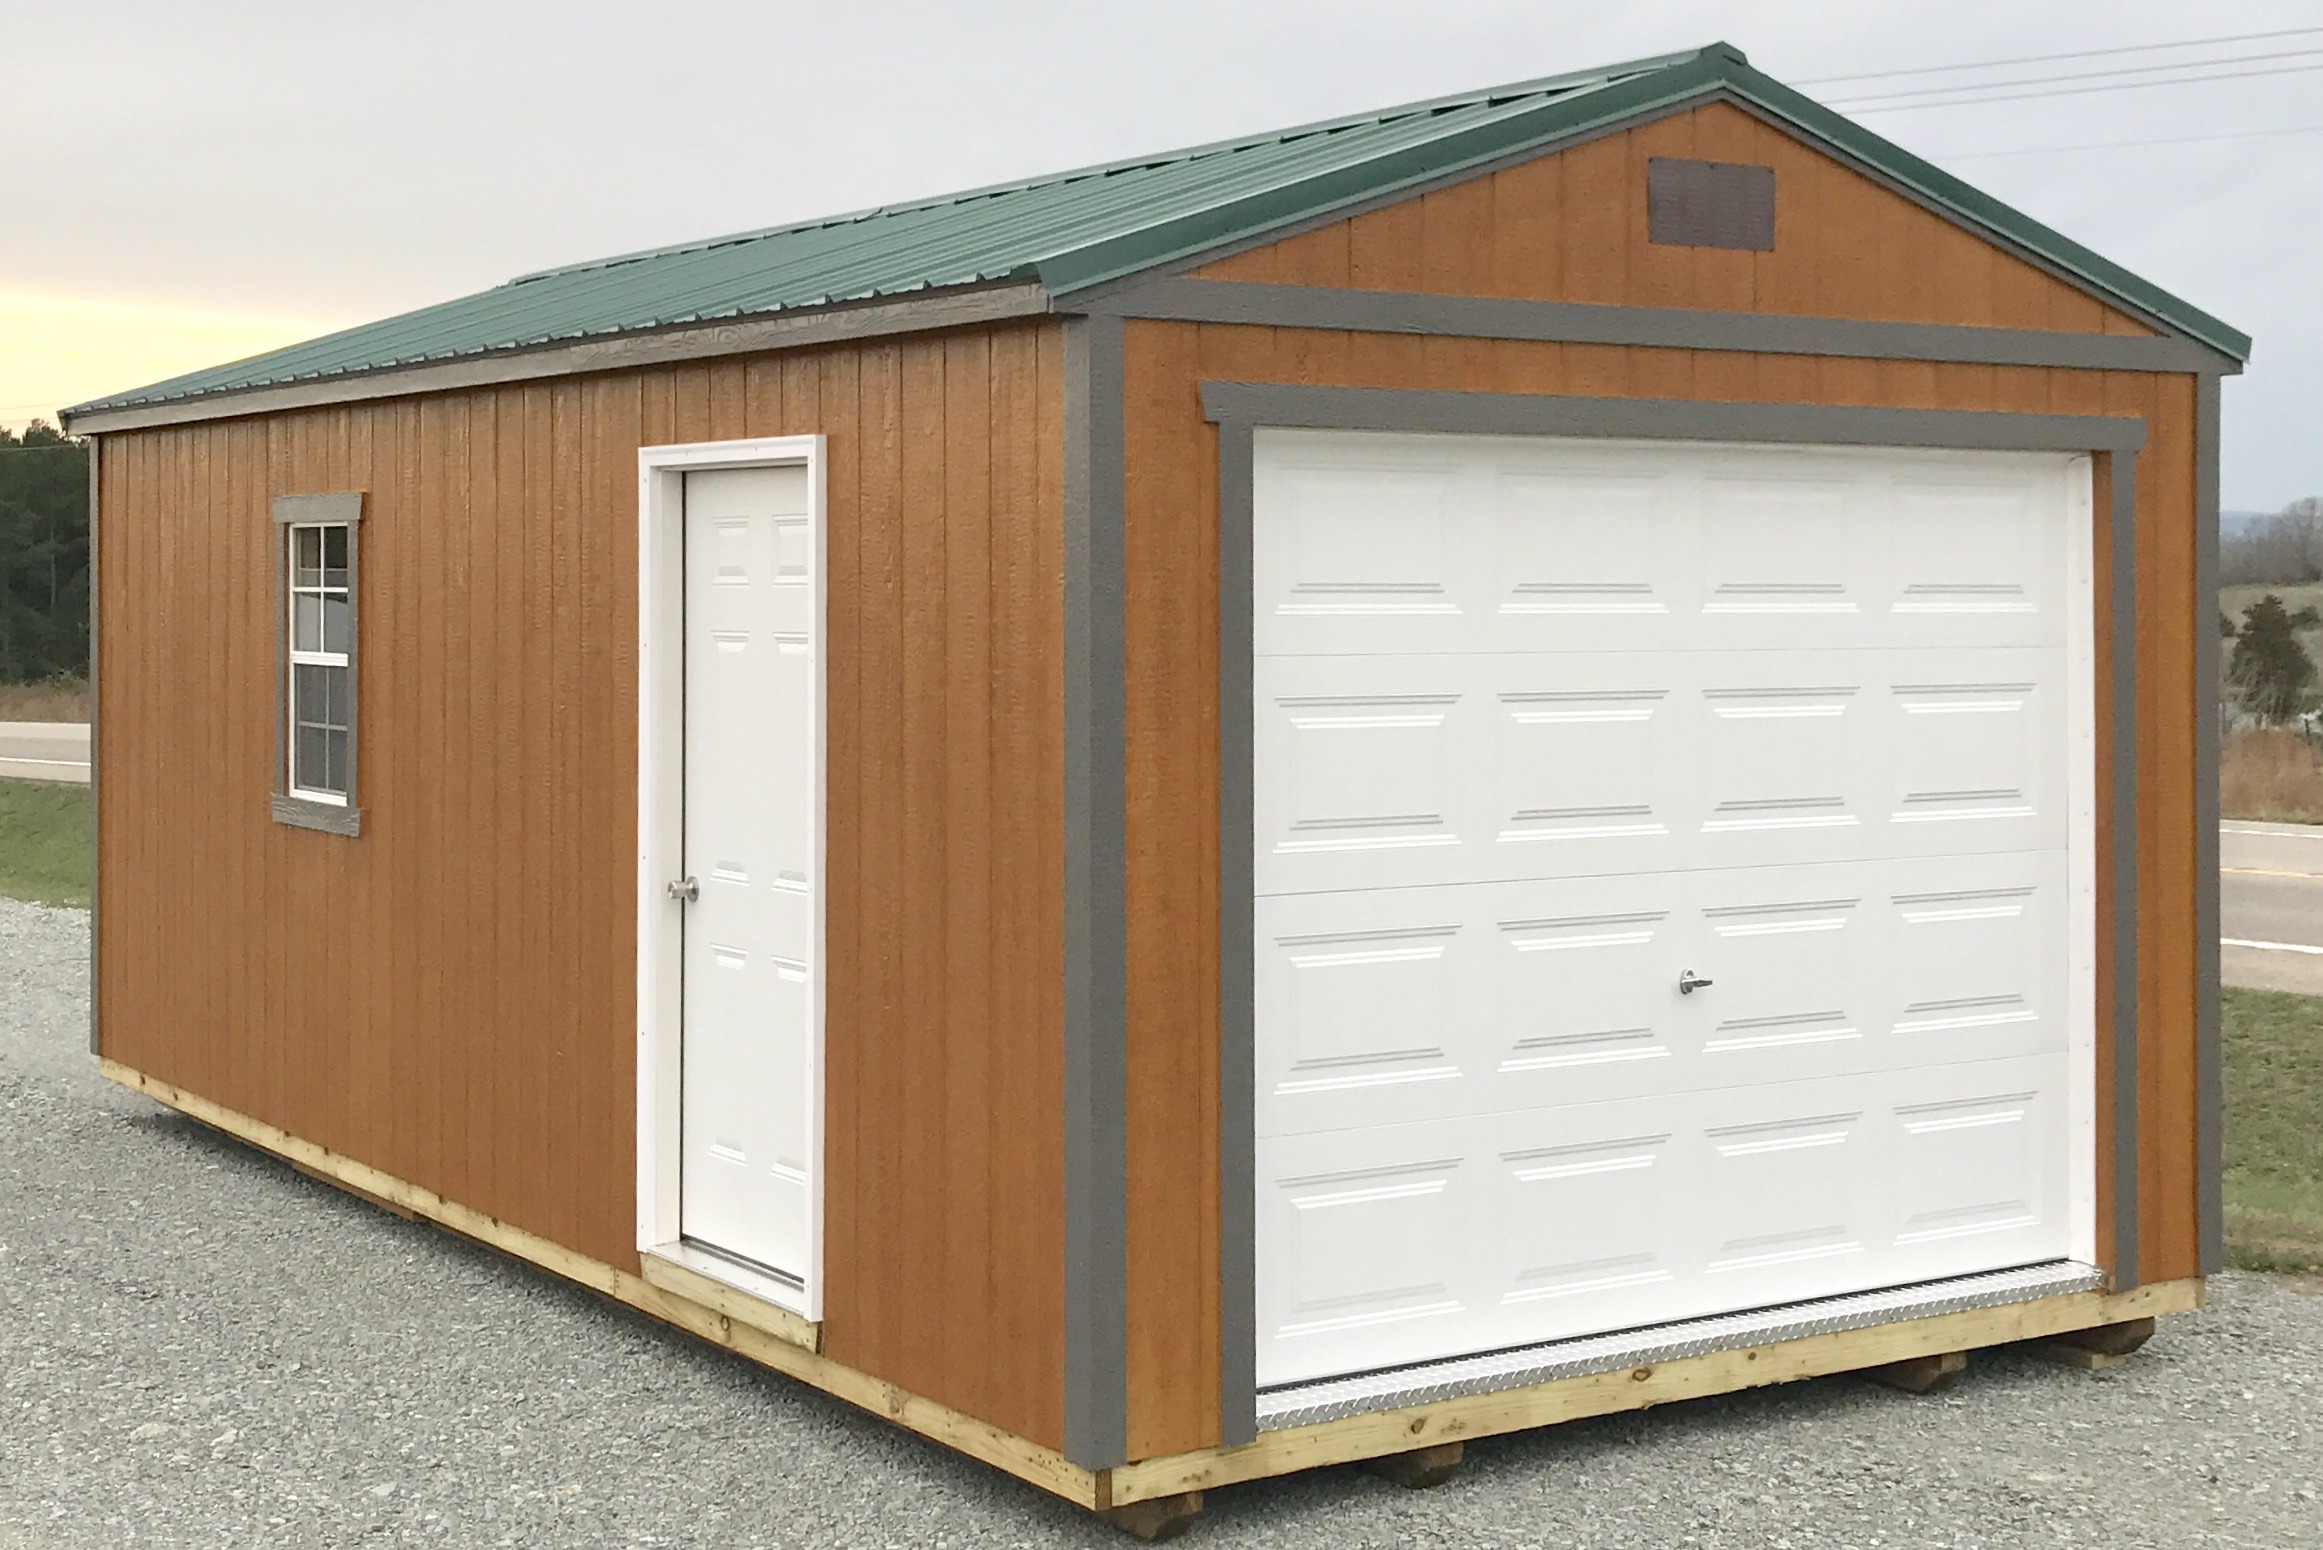 Brown urethane garage with gray trim, white doors, and green roof